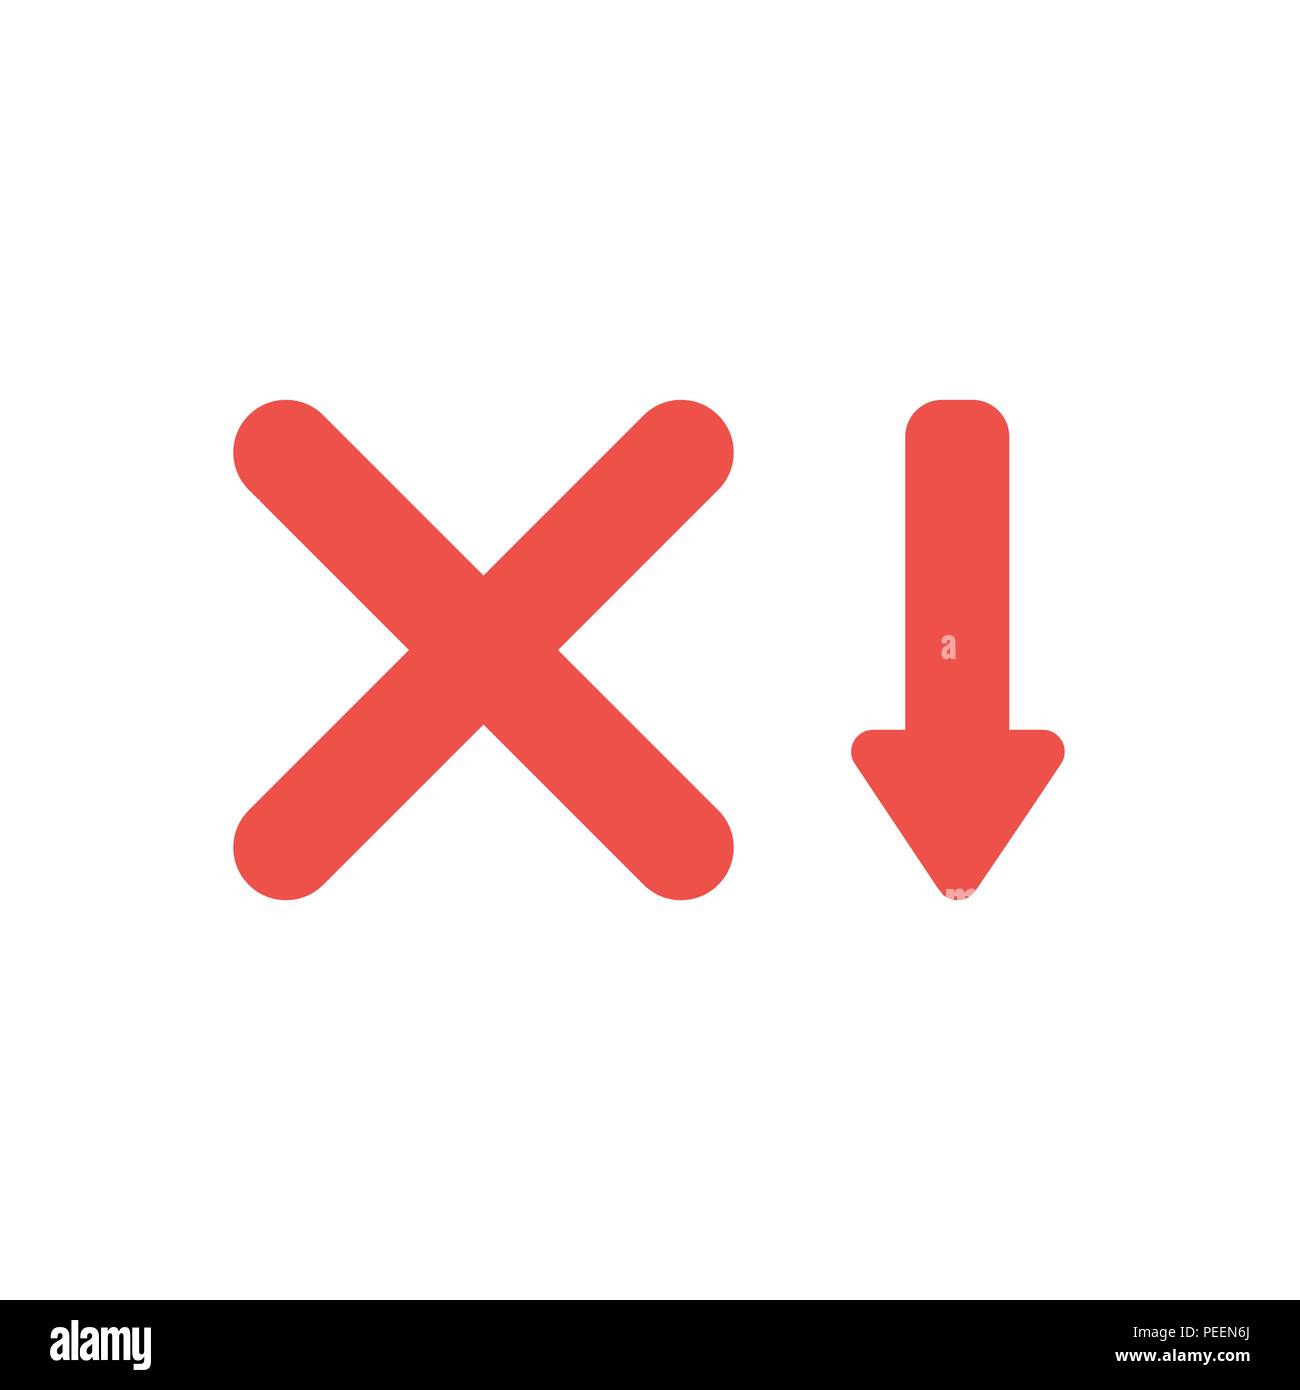 Flat design vector illustration concept of red x mark symbol icon with red arrow moving down. Stock Vector